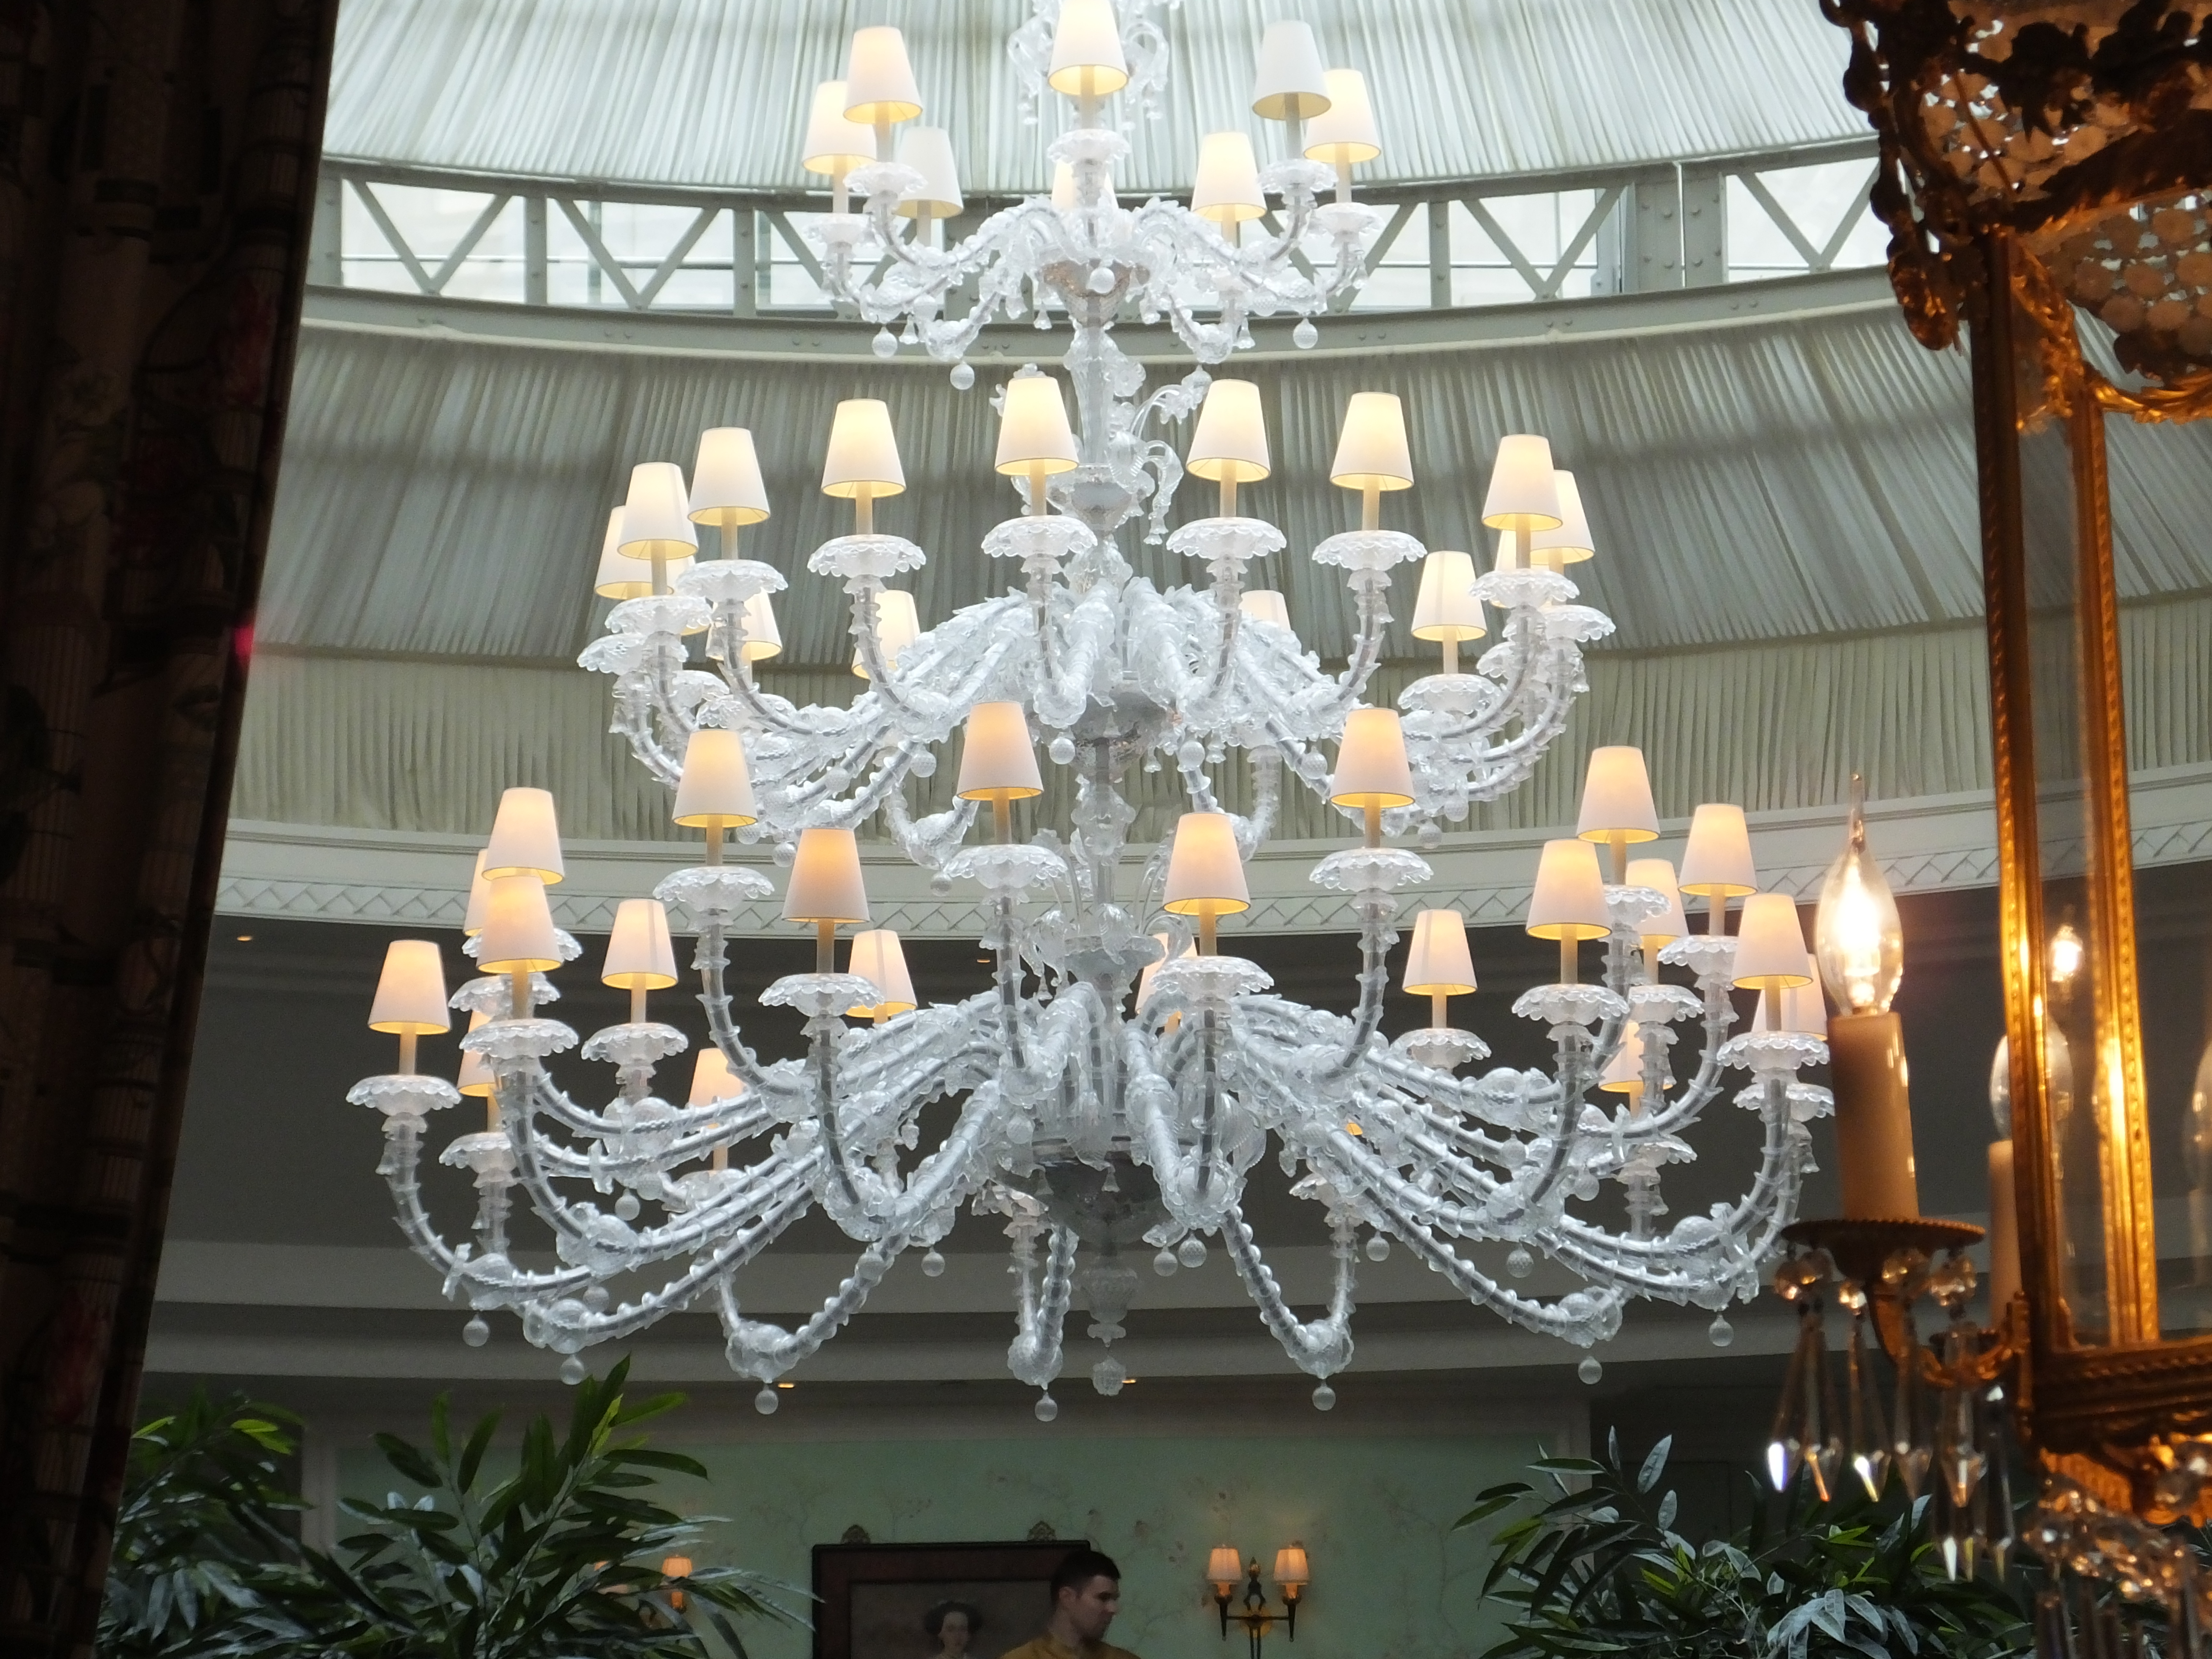 A Murano glass chandelier in the restaurant